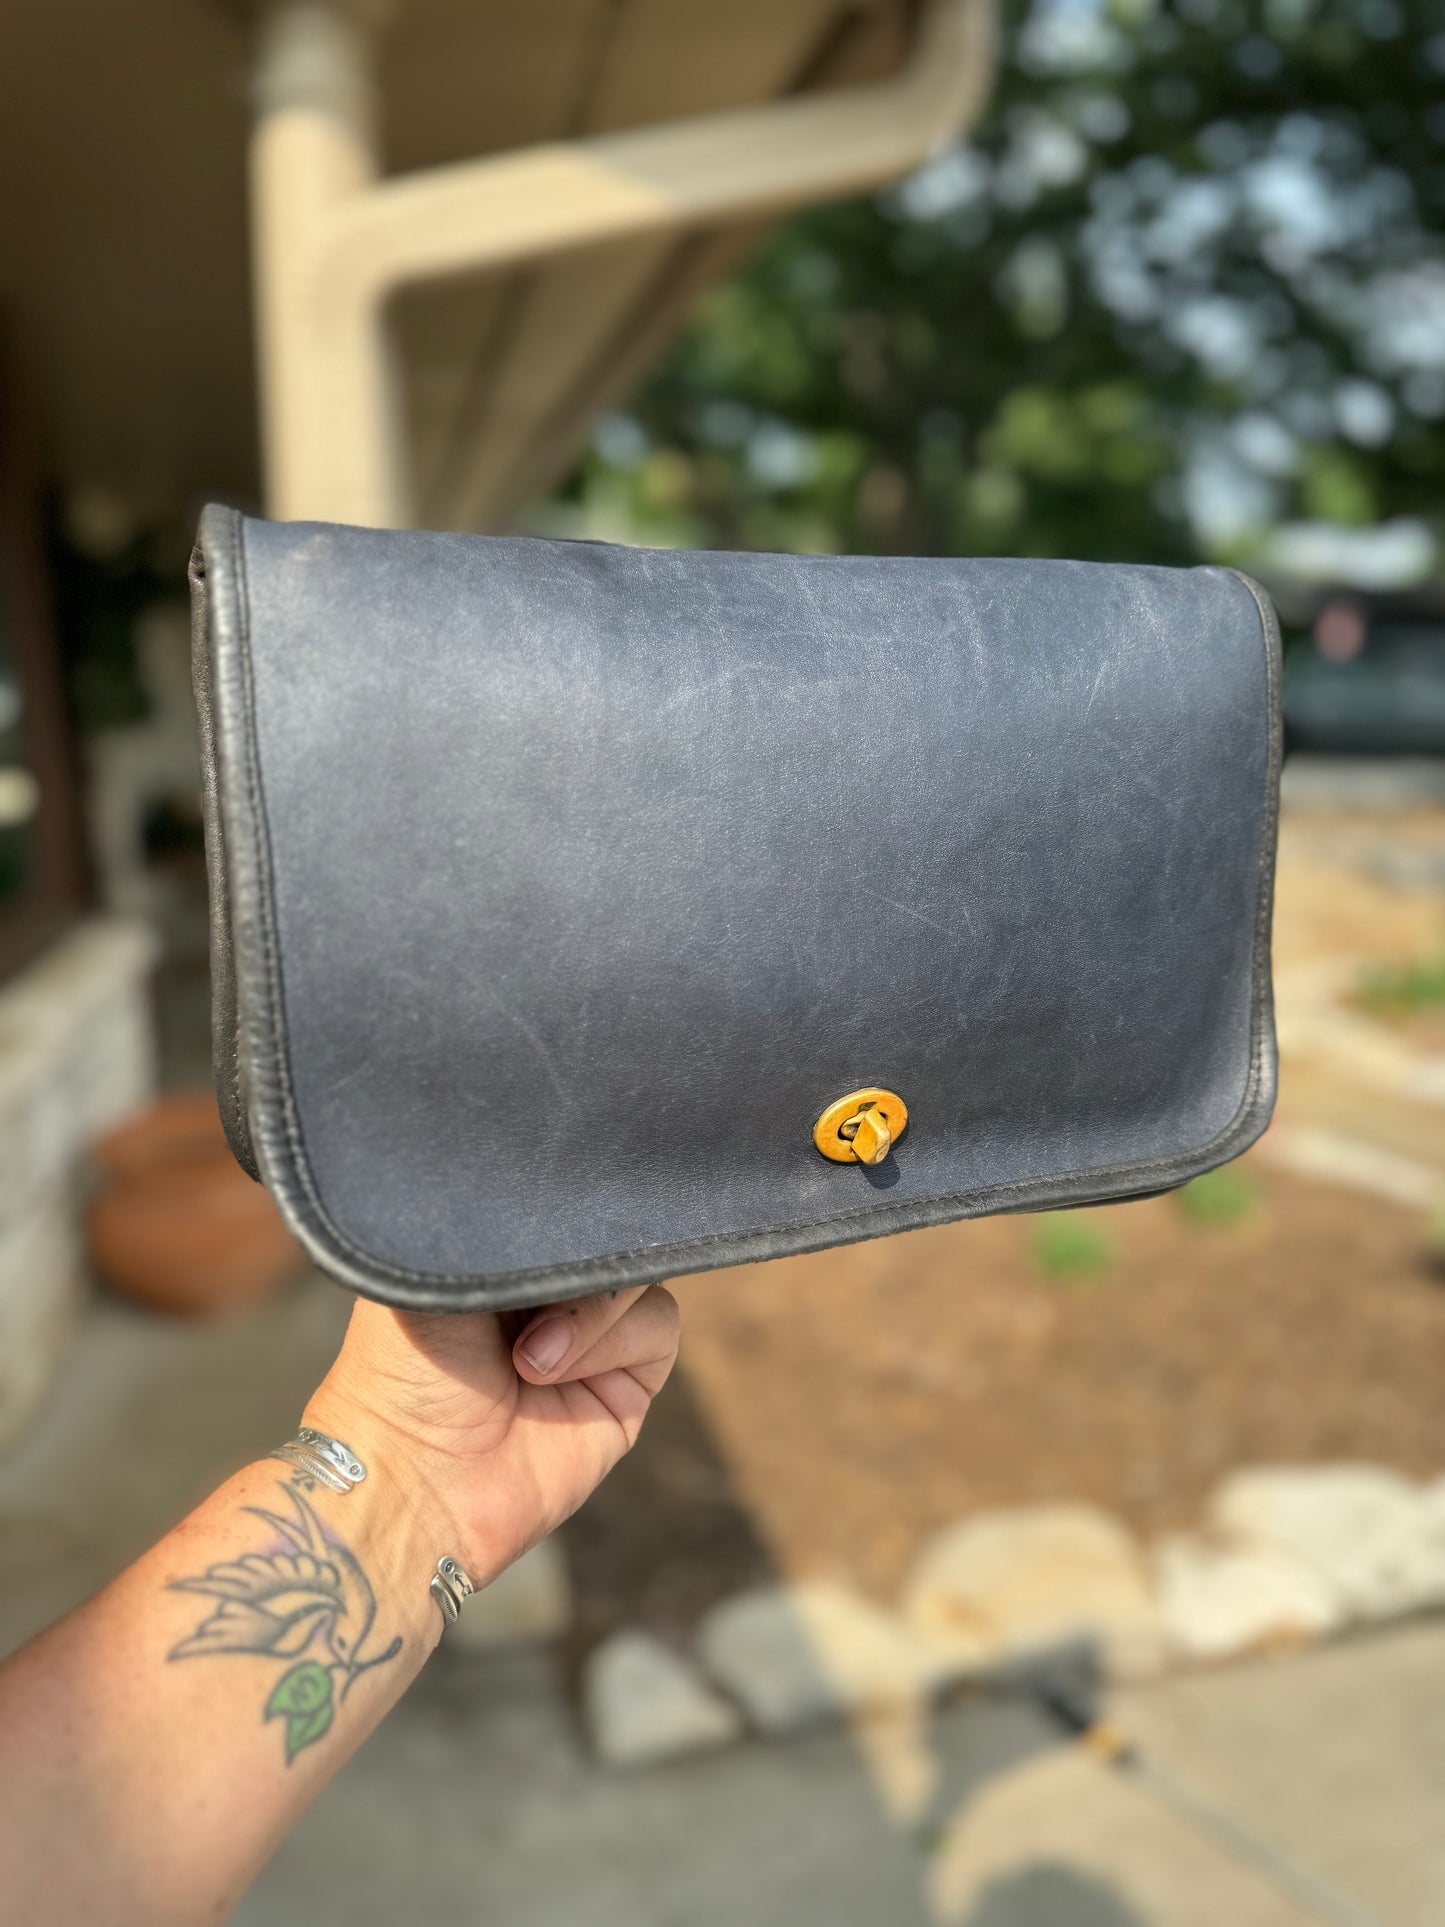 Vintage Coach Navy Convertible Clutch made in Costa Rica